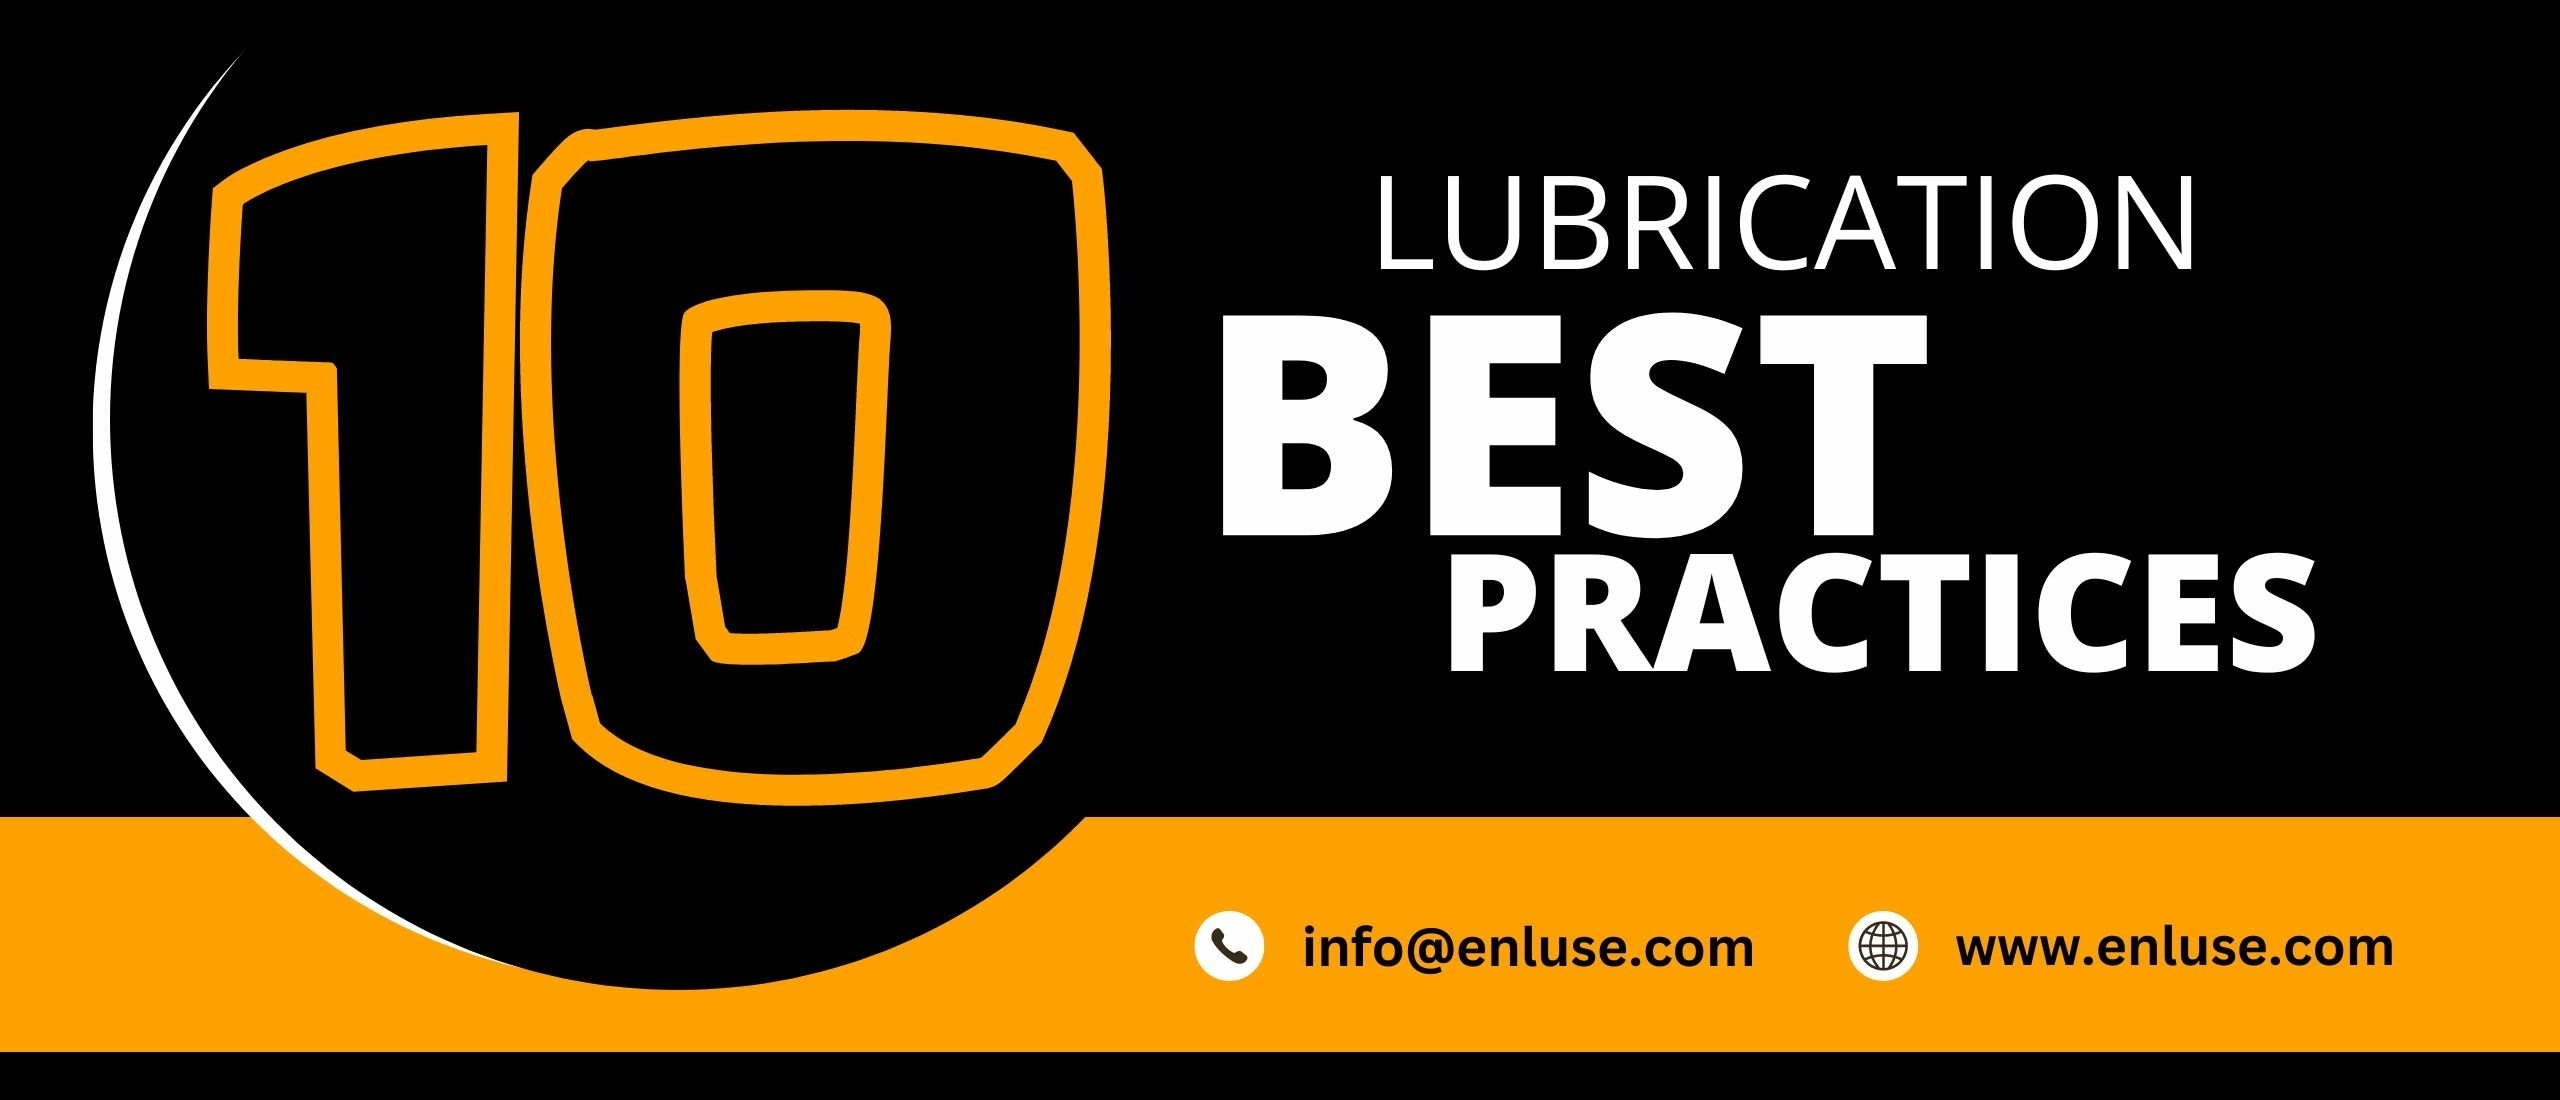 10 Lubrication Best Practices for Improved Equipment Reliability